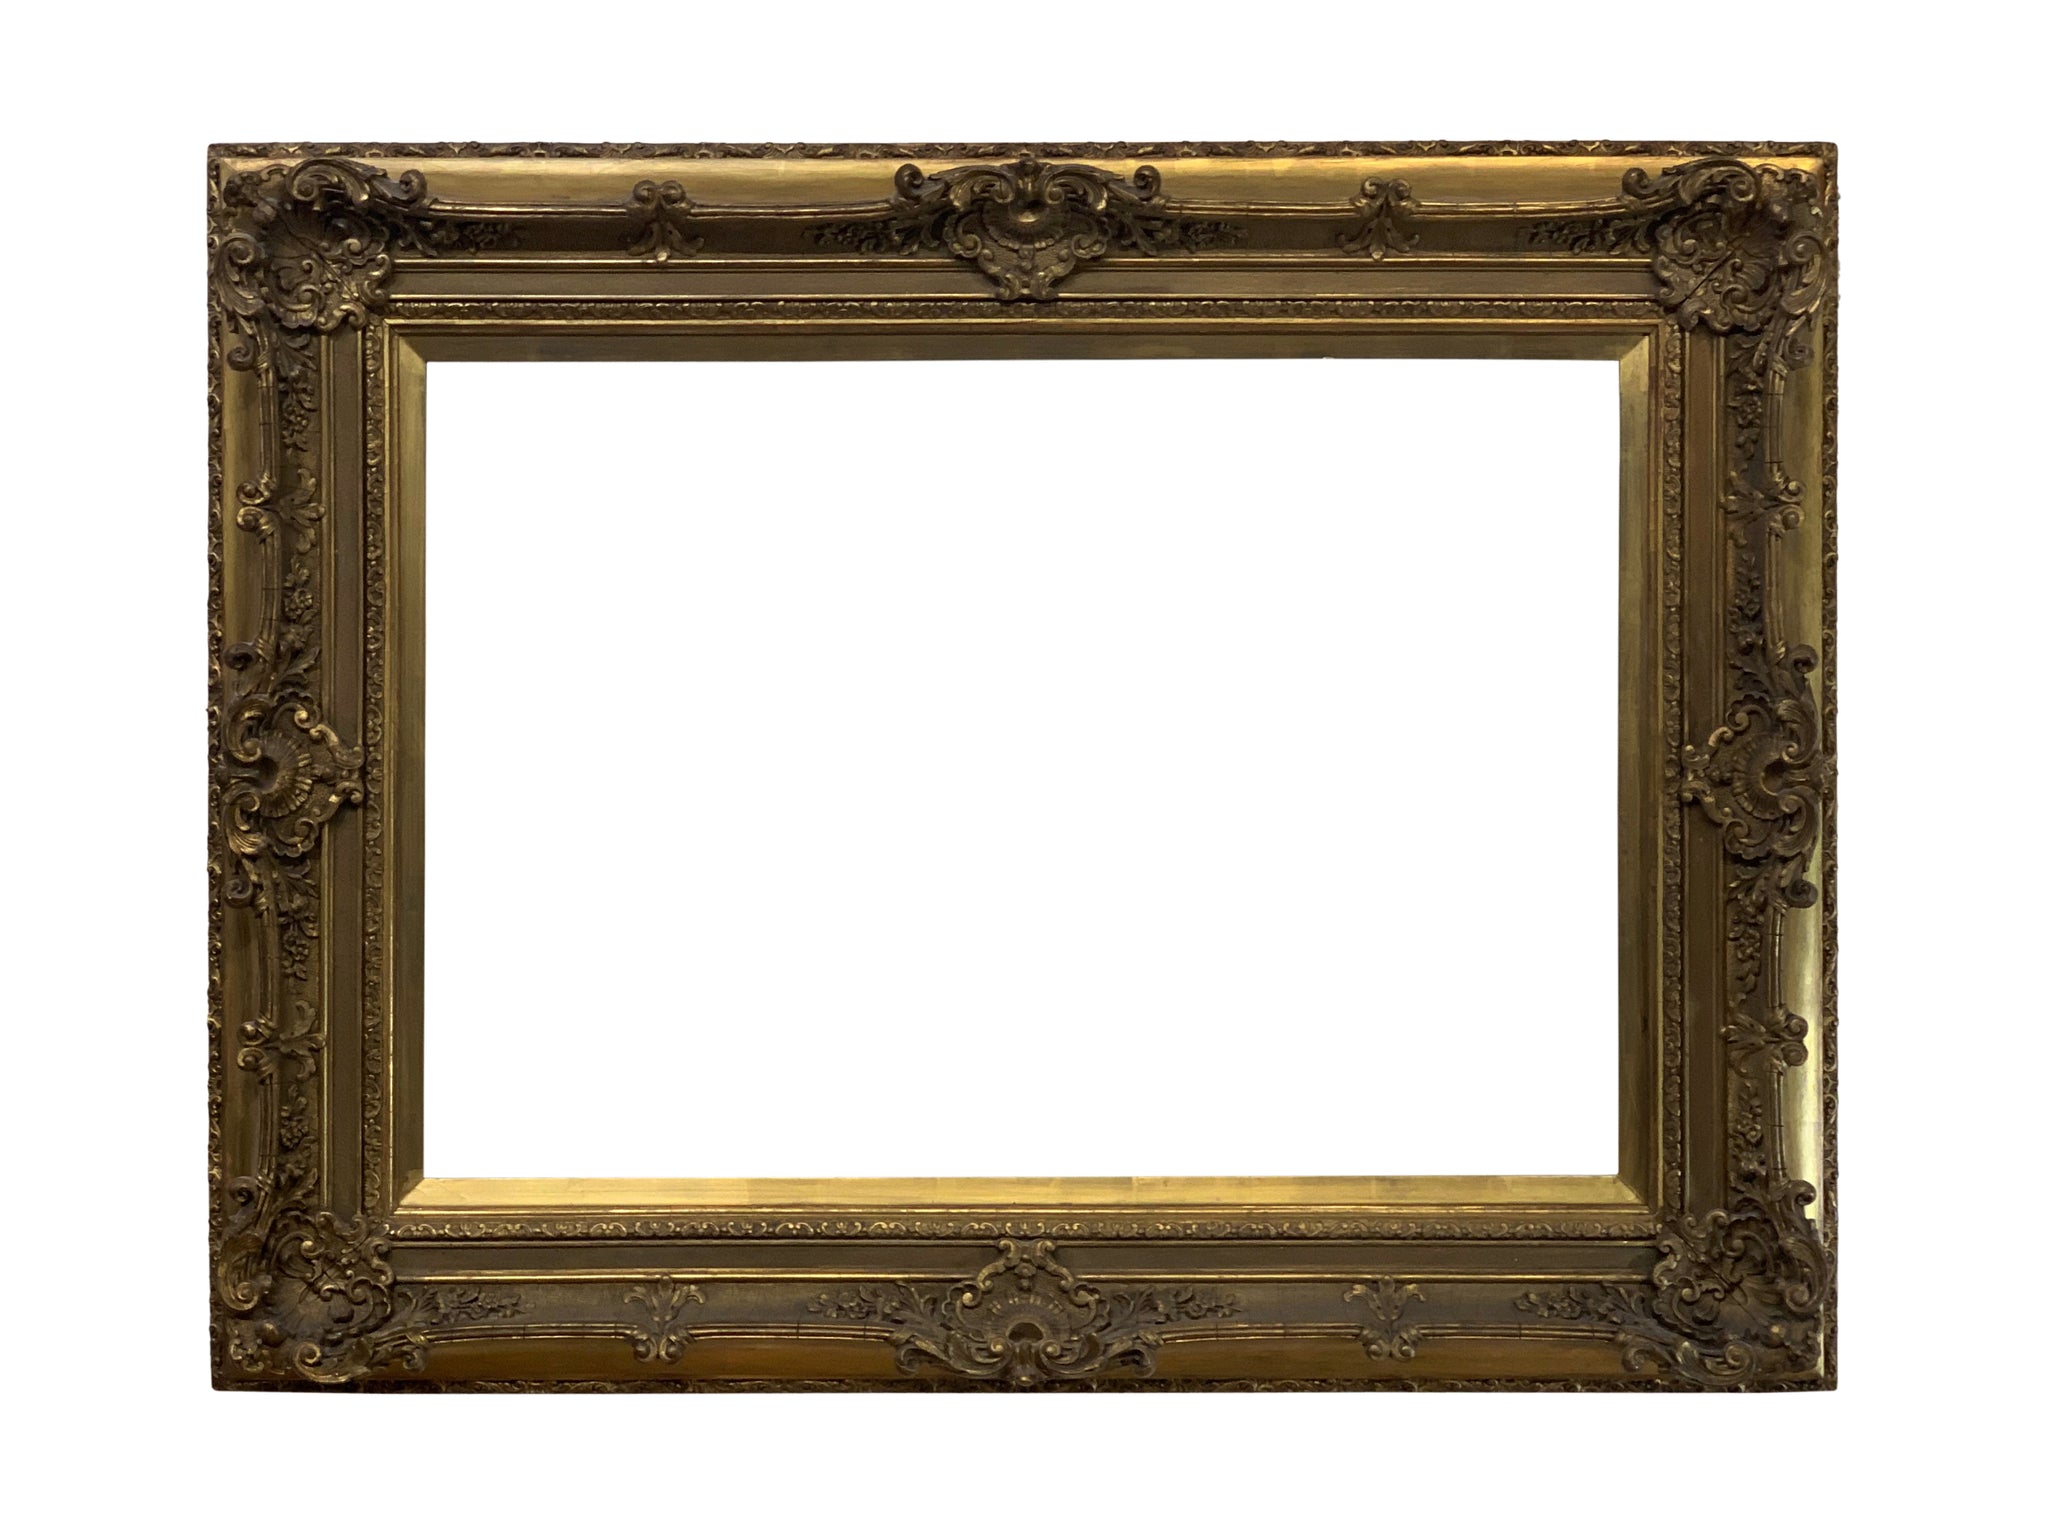 American Louis XV style 22 x 32 gilded gold leaf picture frame for canvas art, circa 1880.